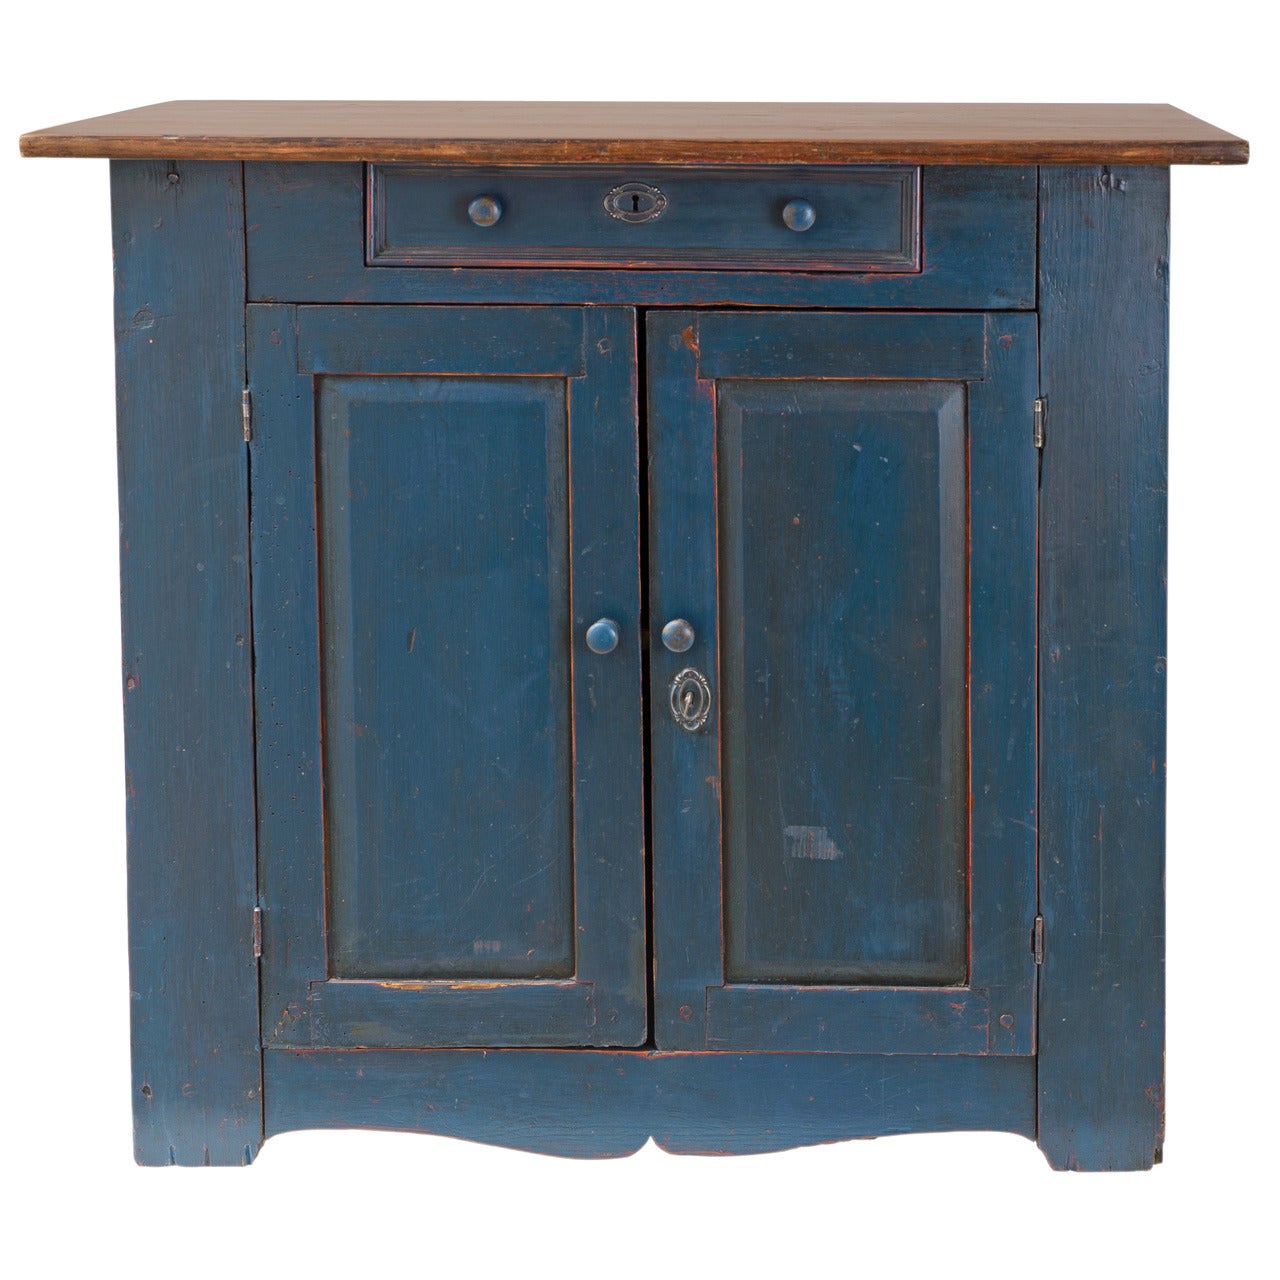 19th Century American Painted Cabinet